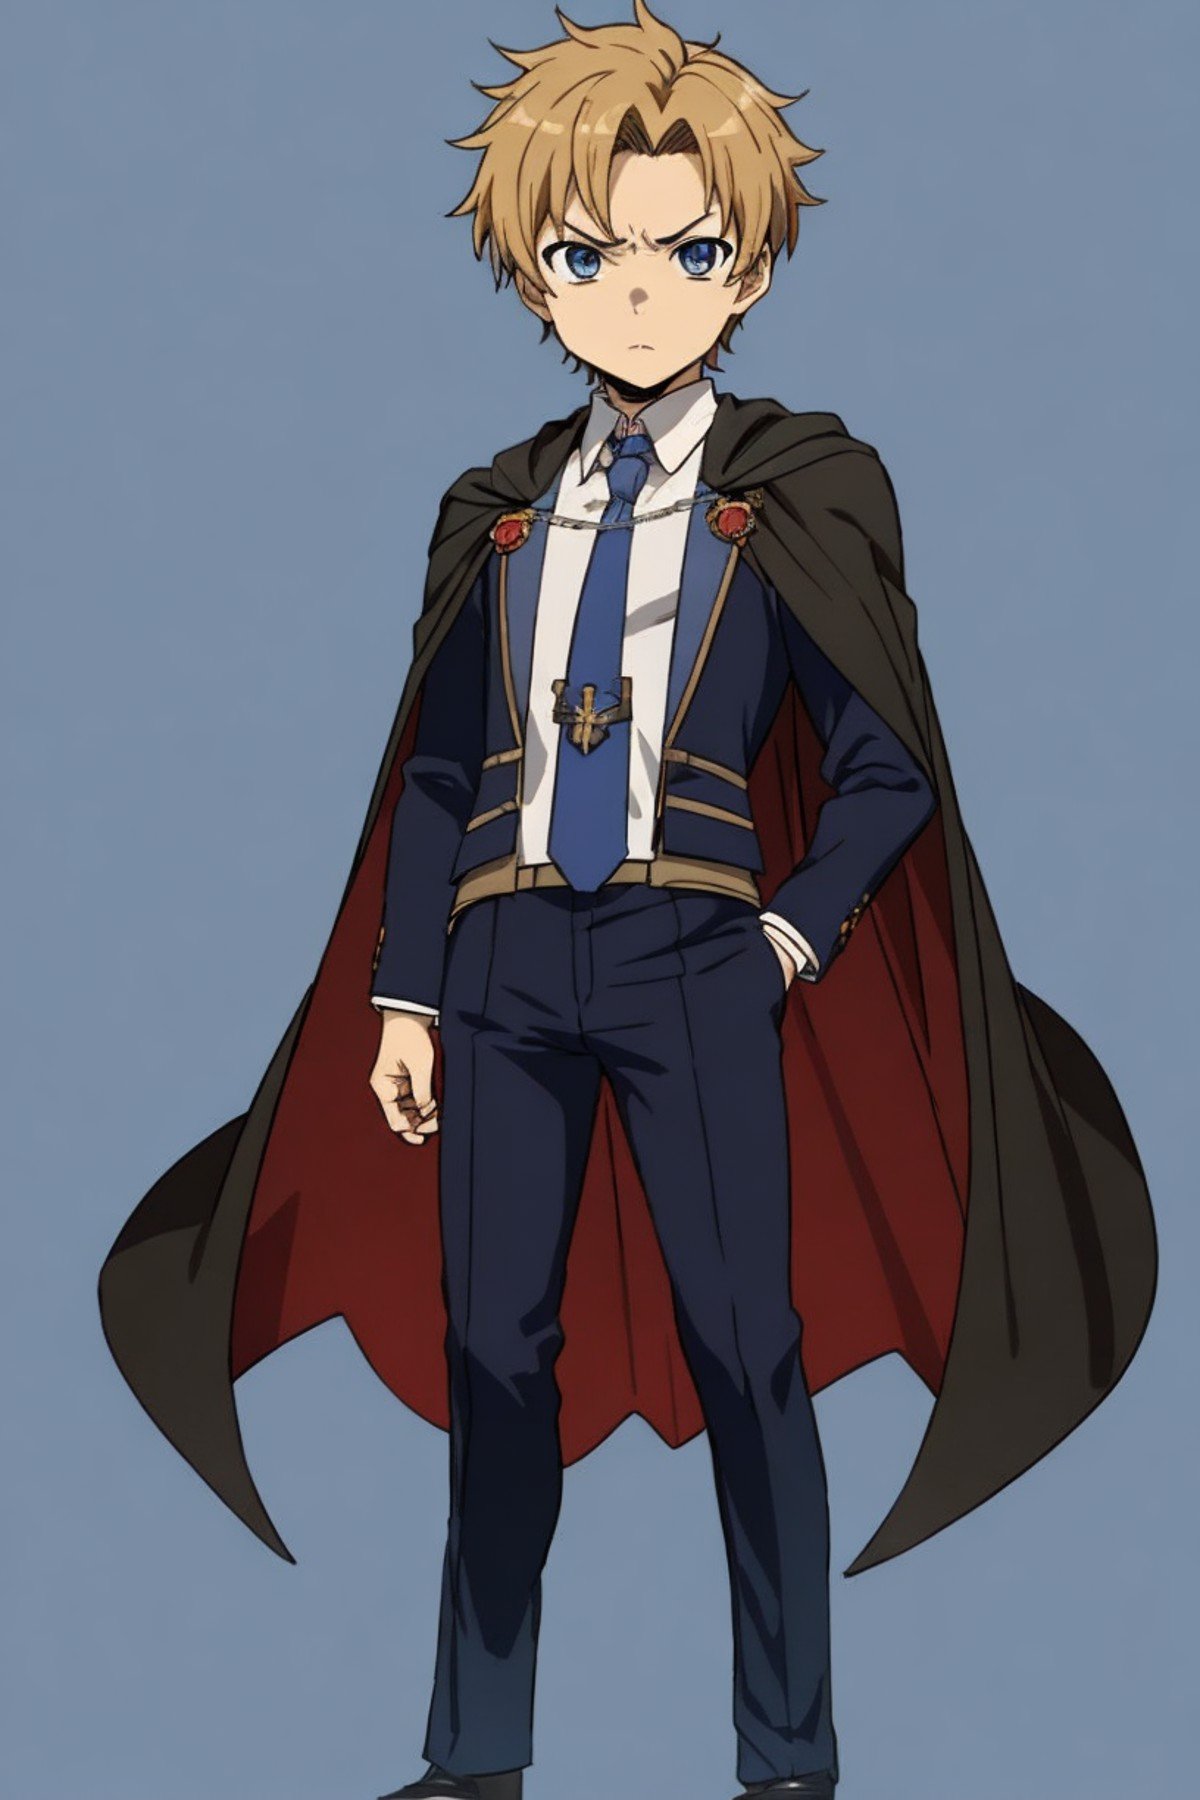 masterpiece, chibi, full body, 1boy, solo, mature male, serious, toshirop5t, suit, shirt, necktie, short hair, cape, hero pose, rudeus, blue background, Negative prompt: (worst quality, low quality, extra digits:1.4),negative_hand-neg, EasyNegativeV2,   Steps: 25, Sampler: DPM++ 2M SDE Karras, CFG scale: 7.5, Seed: 791256784, Size: 512x768, Model: seizamix_v2, Clip skip: 1,